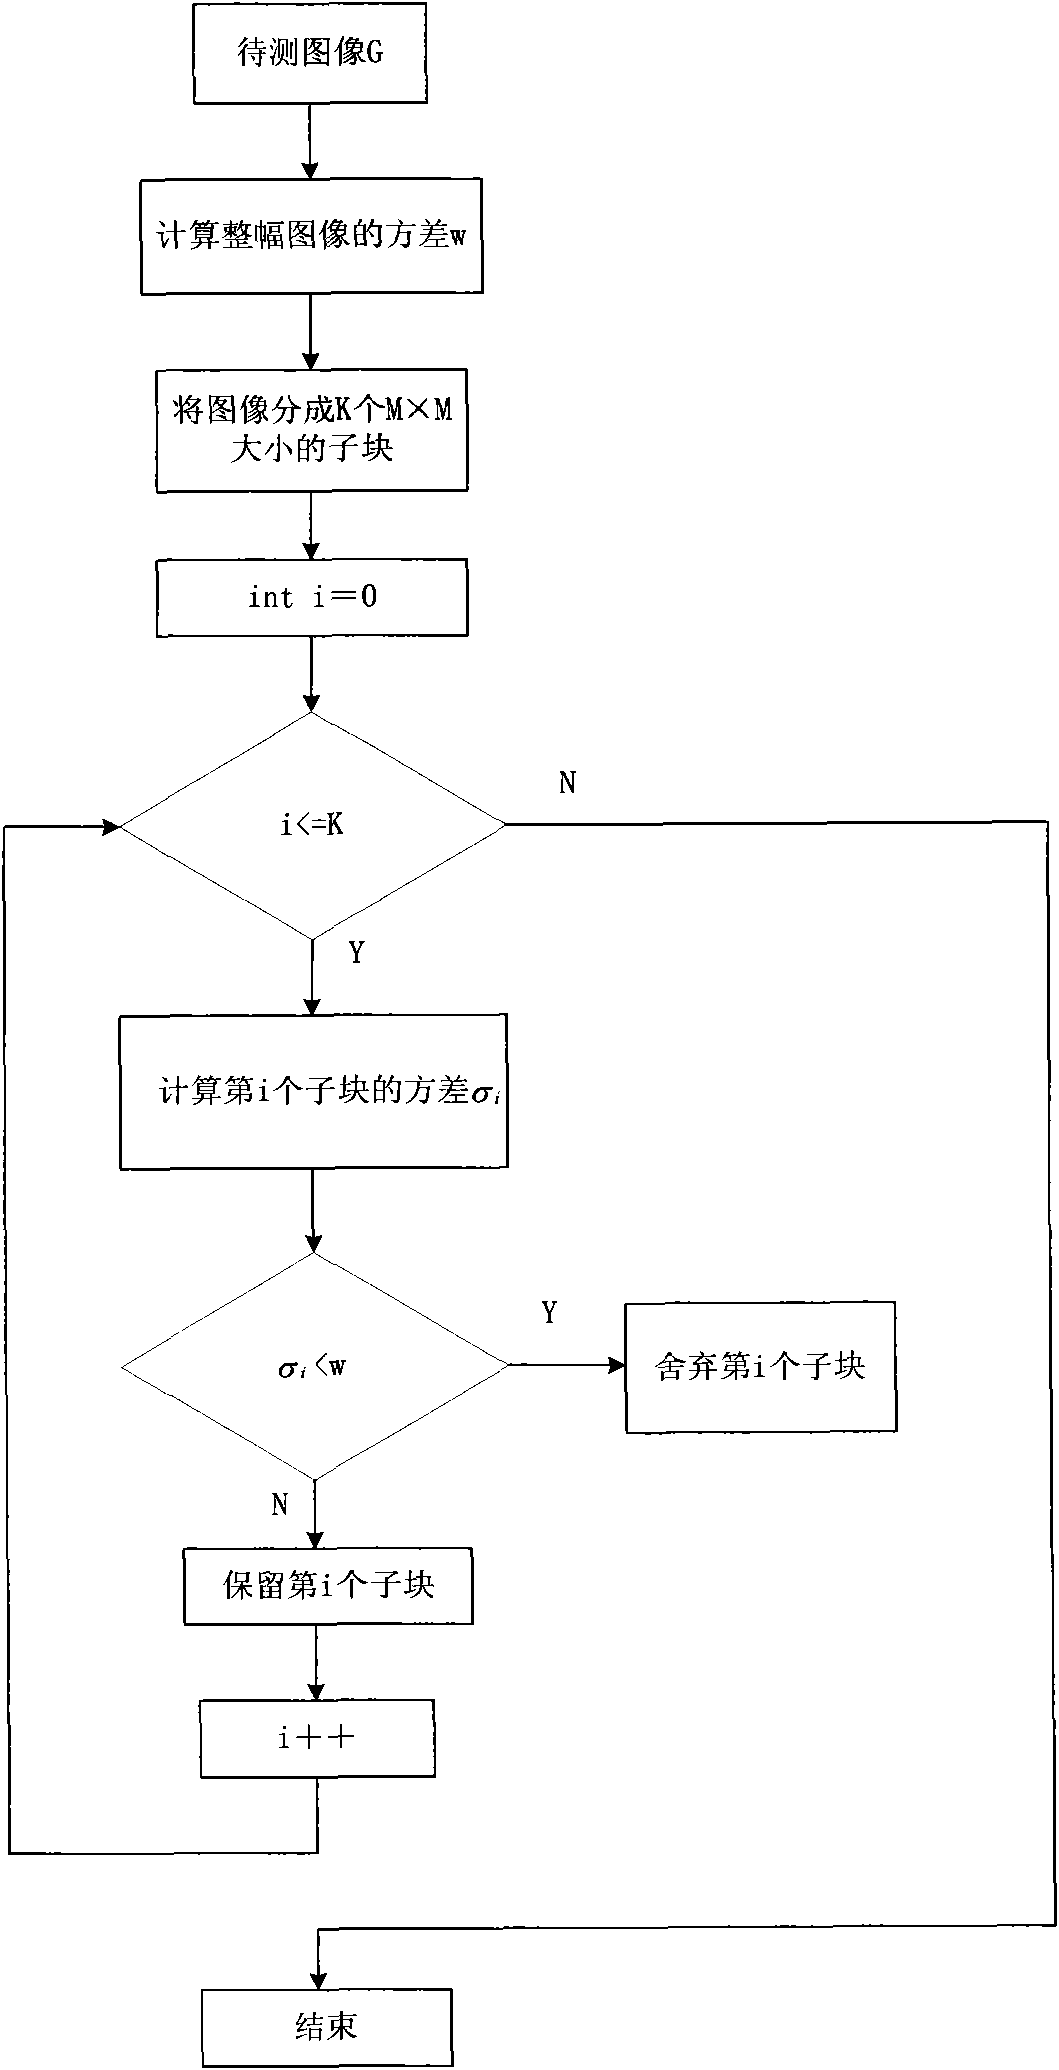 Computer generated image passive detection method based on fractal dimension